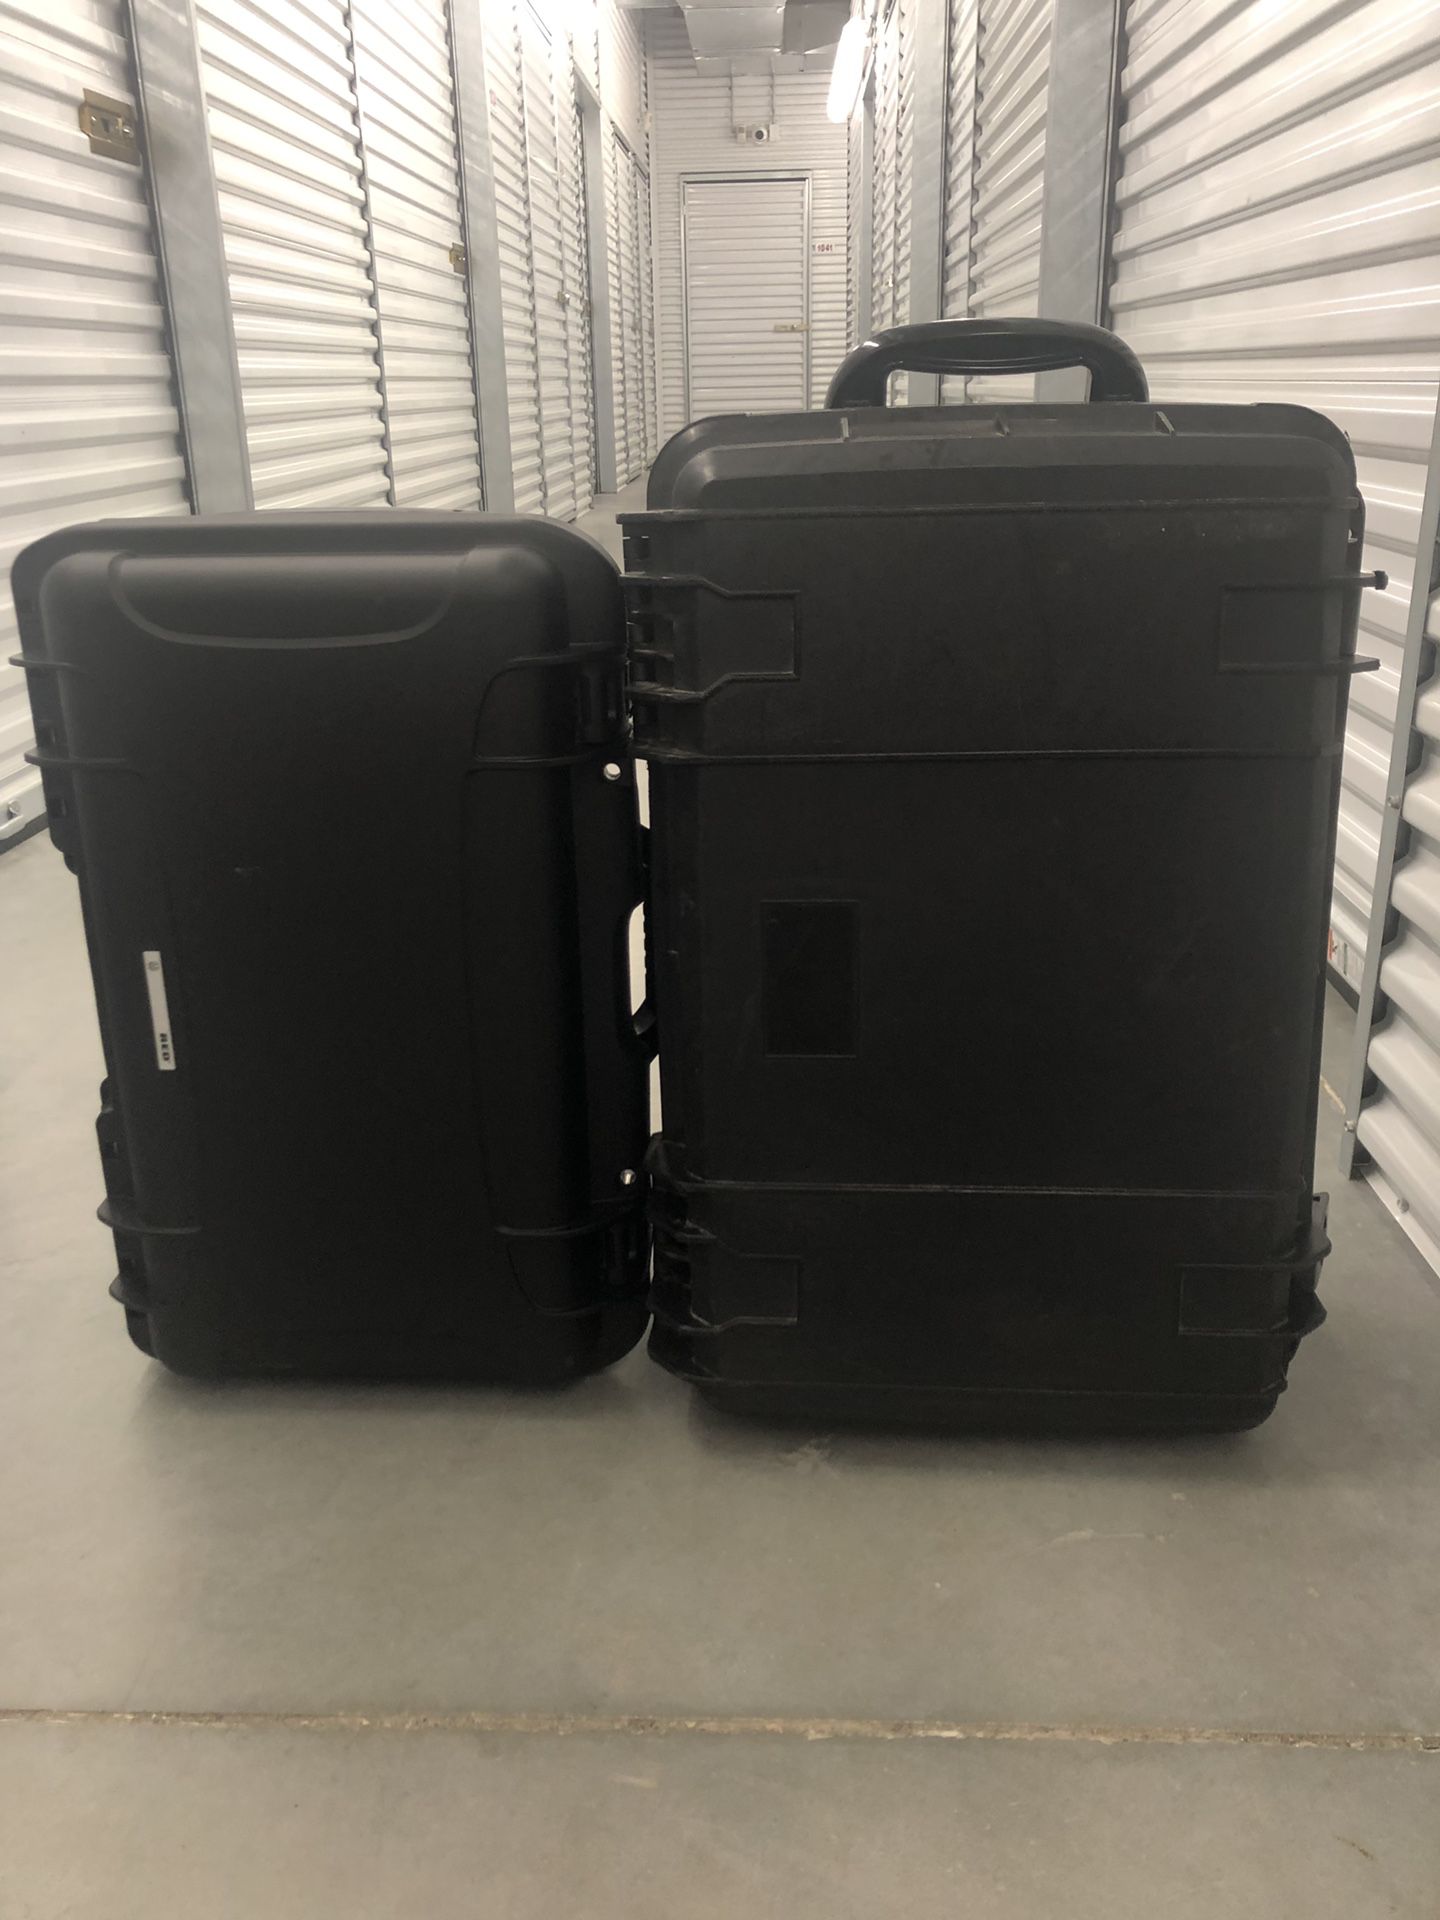 2 hard shell drone case with accessories NO DRONE